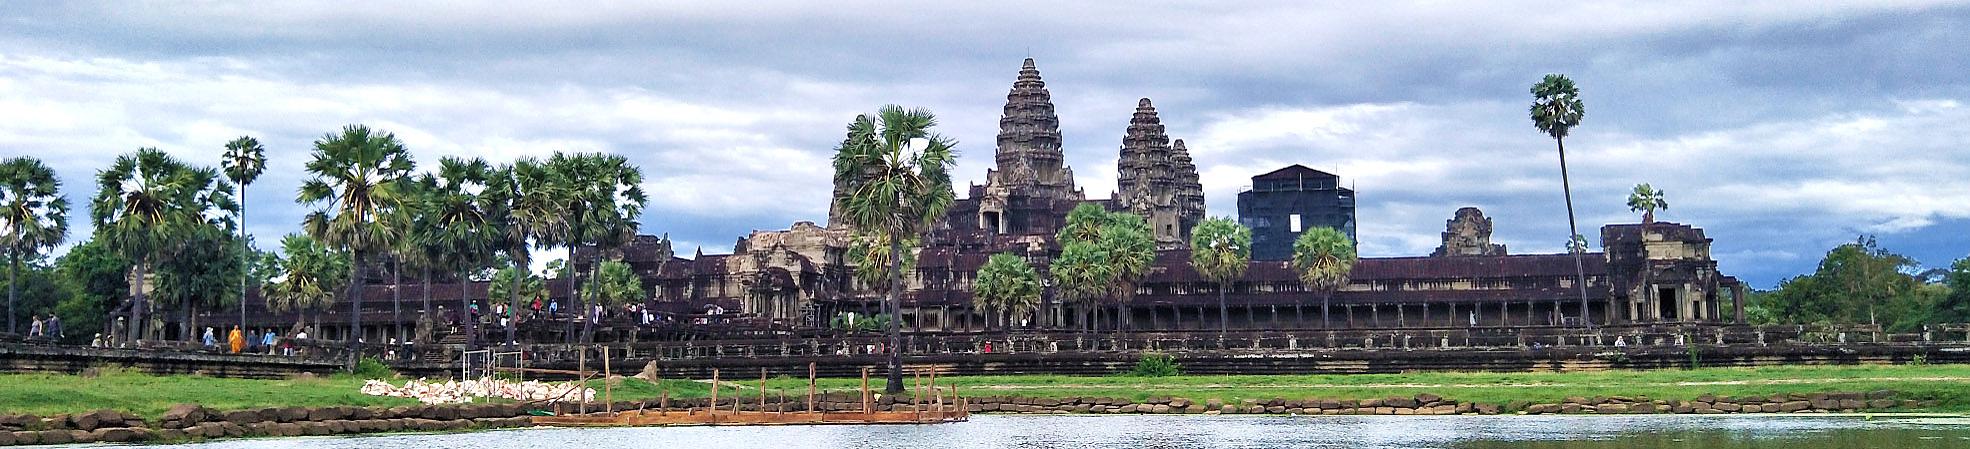 Top 10 Facts About Angkor Wat That Will Blow Your Mind